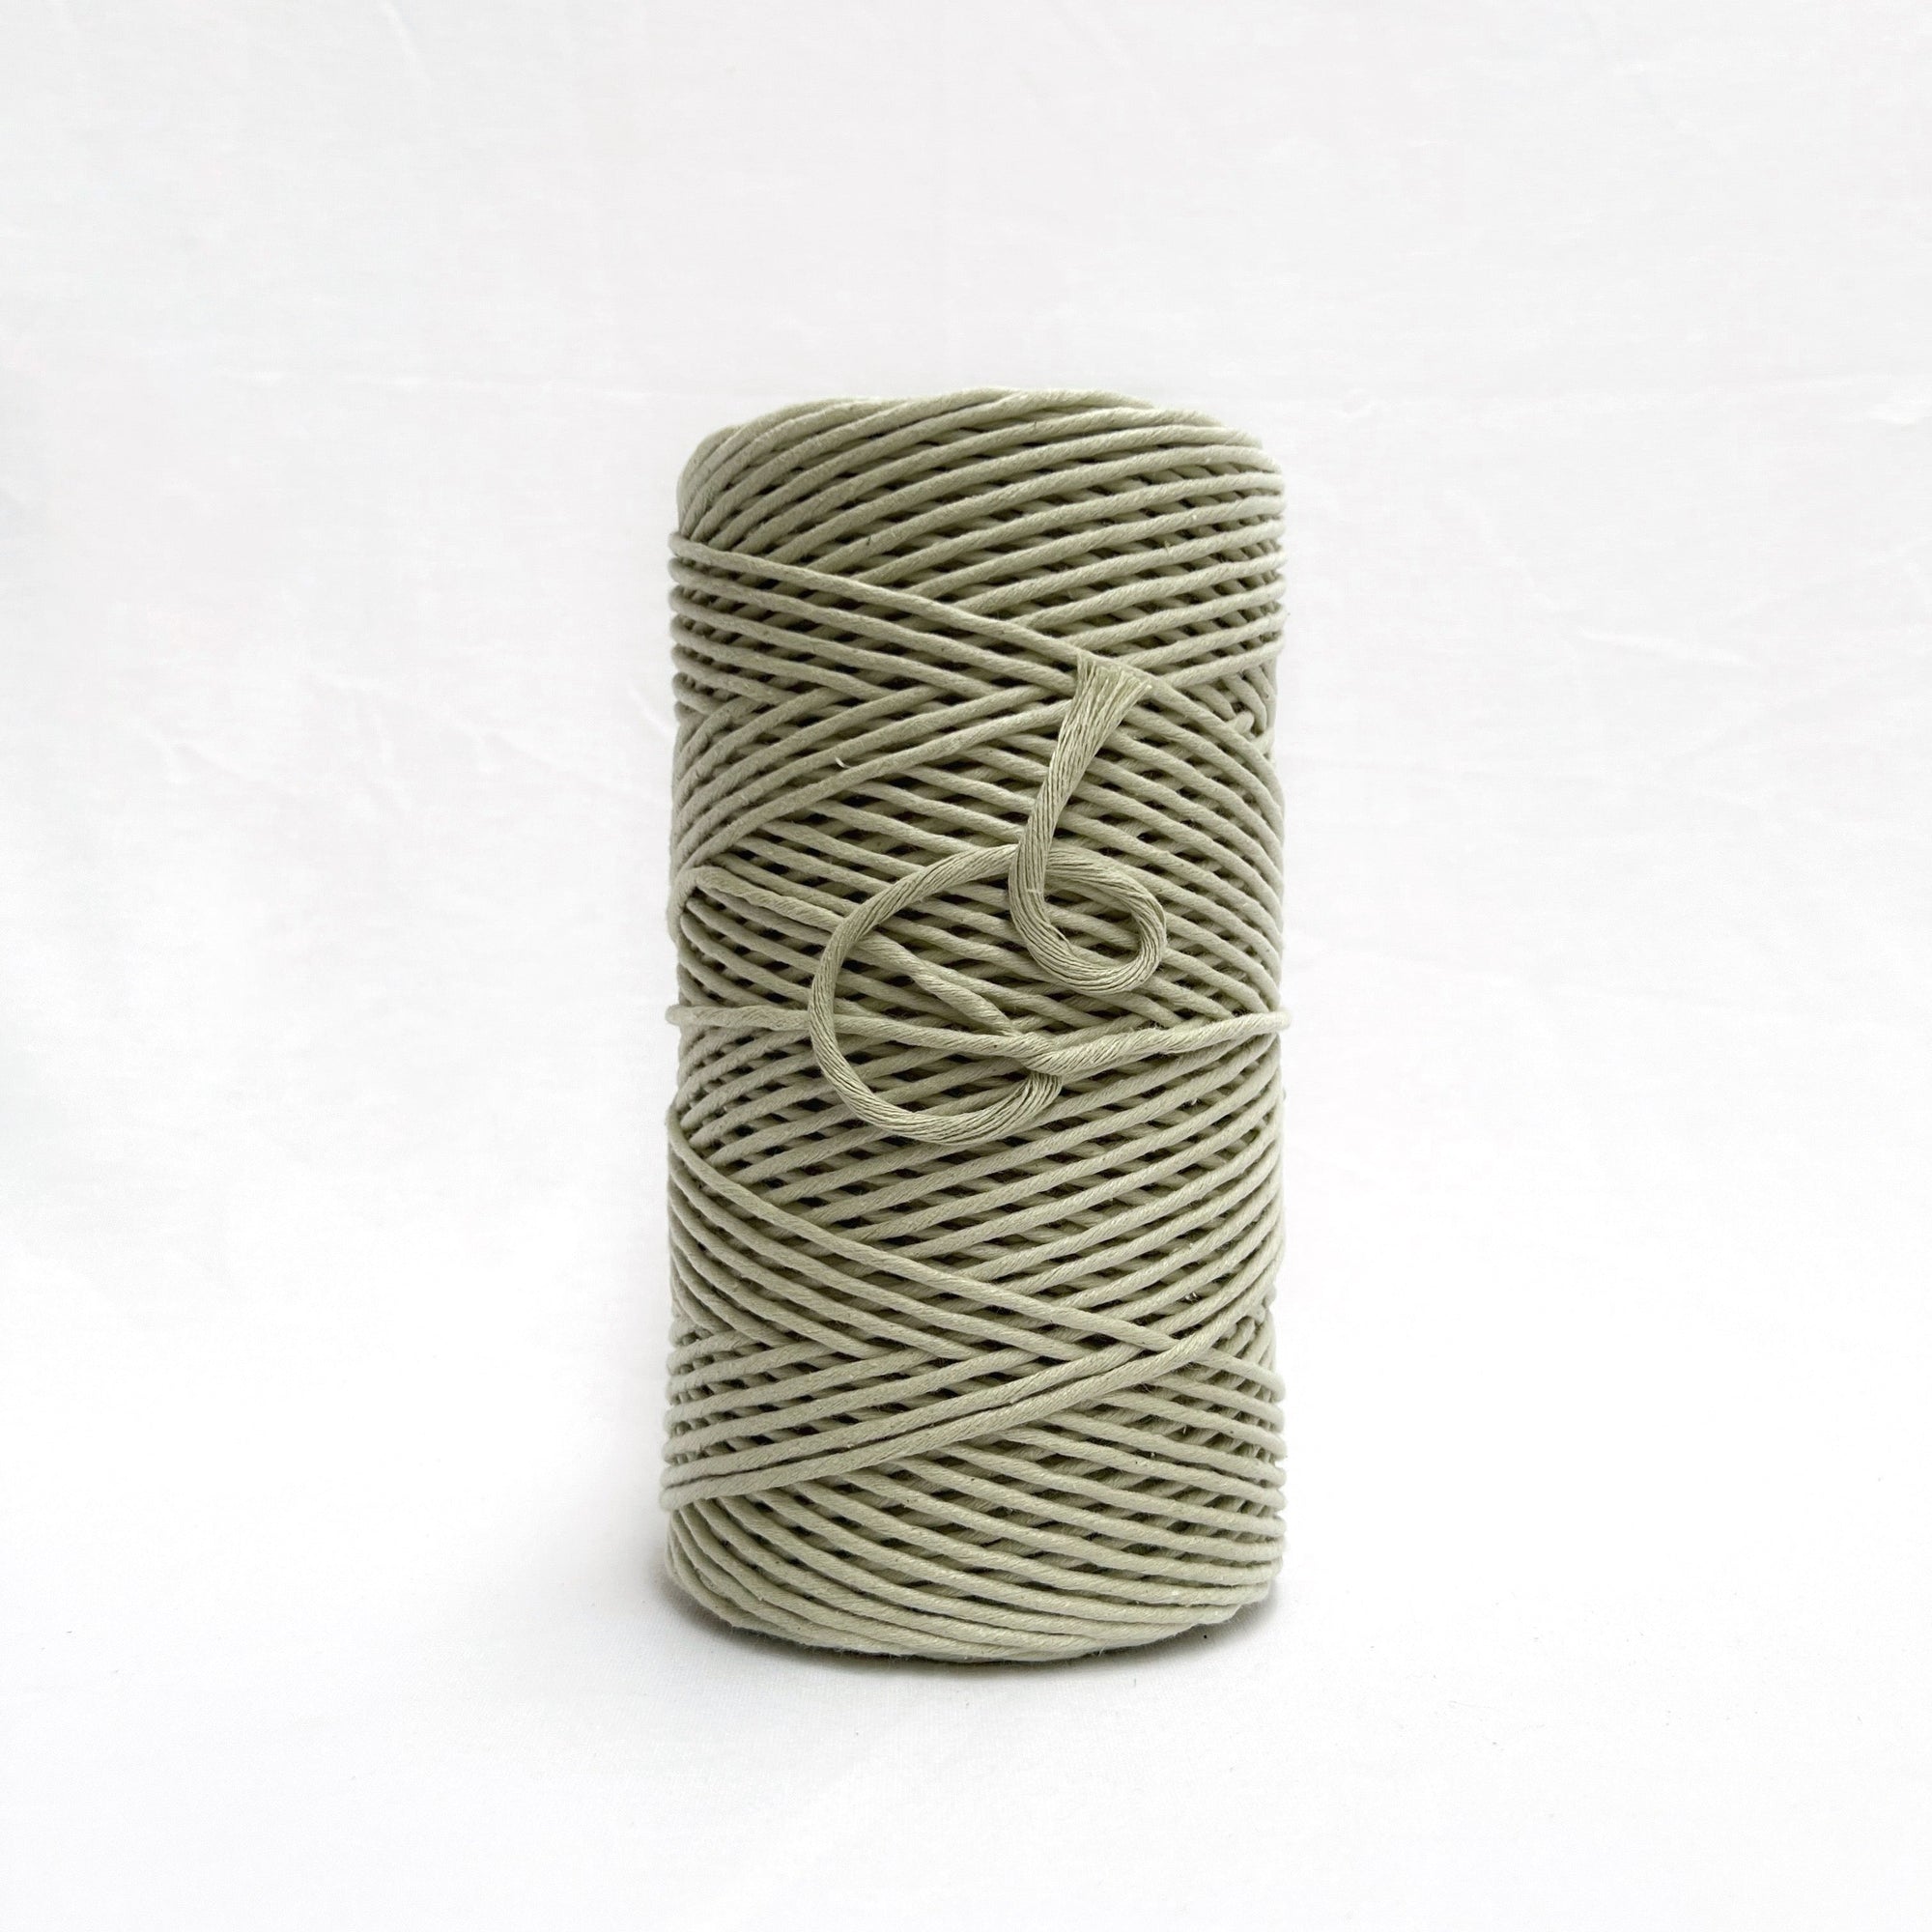 mary maker studio 1kg 5mm recycled cotton macrame string in soft green tea colour buy online for macrame workshops beginners and advanced artists